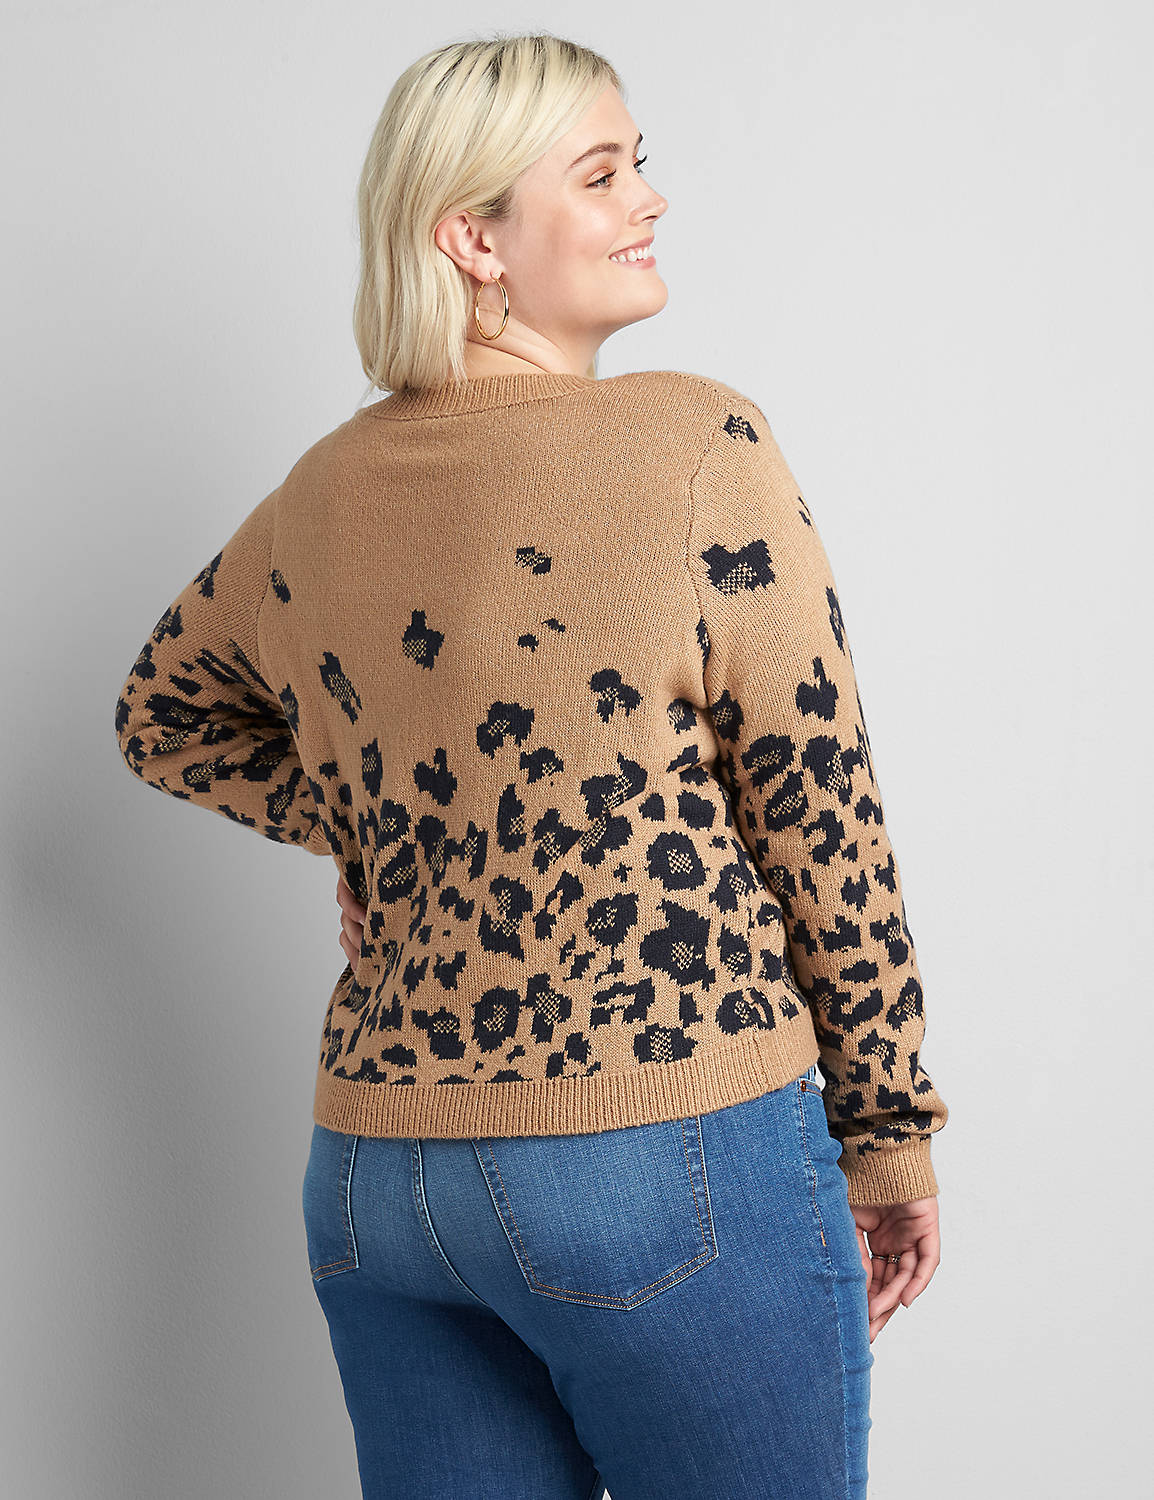 Cropped Leopard Sweater Product Image 2